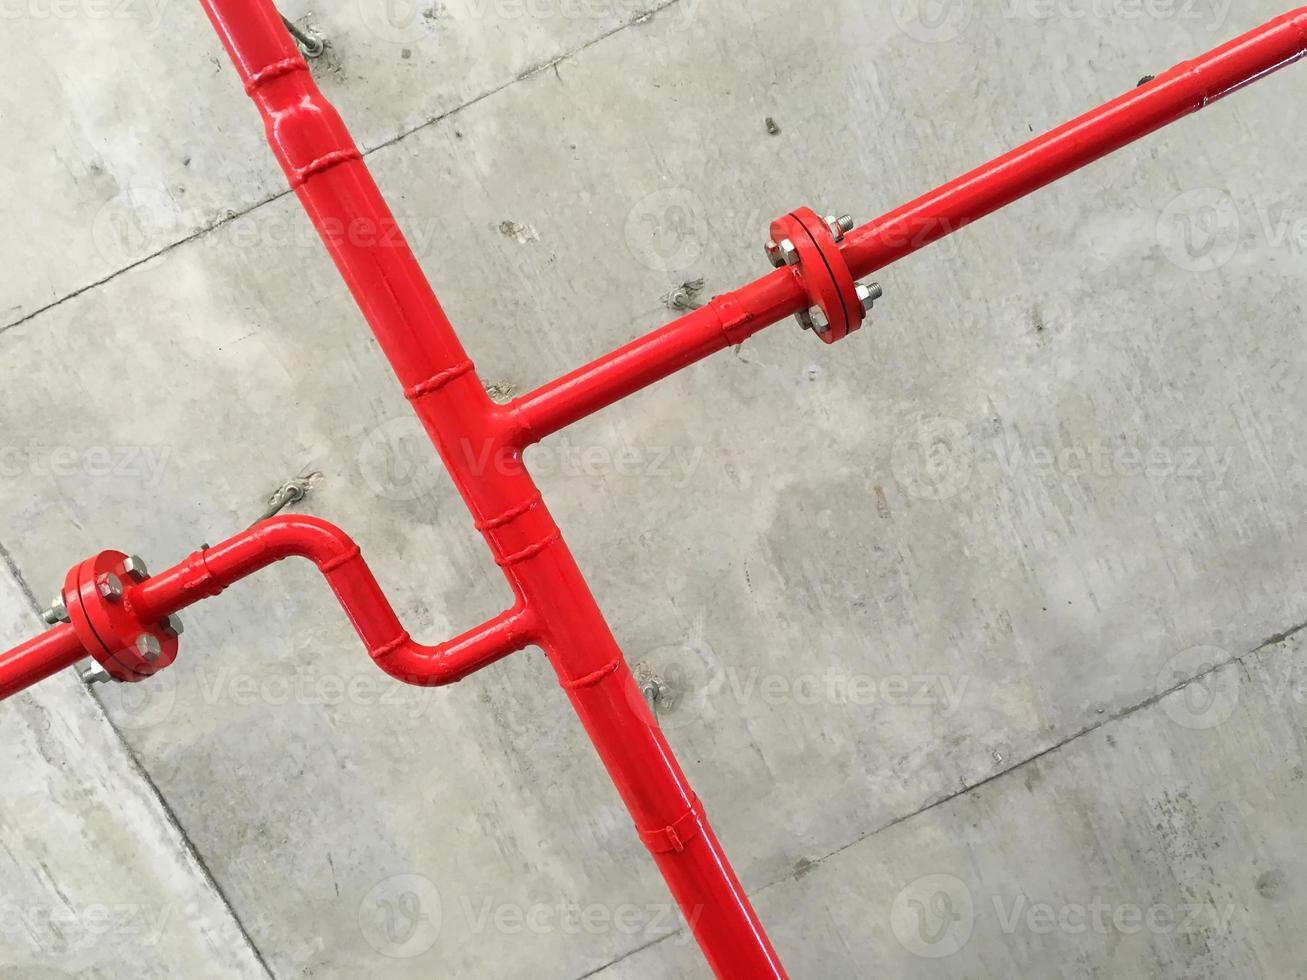 Water valve for fire fighting systems, water sprinkler and fire alarm system, water sprinkler control system, red generator pump for water sprinkler piping and fire alarm control system. photo